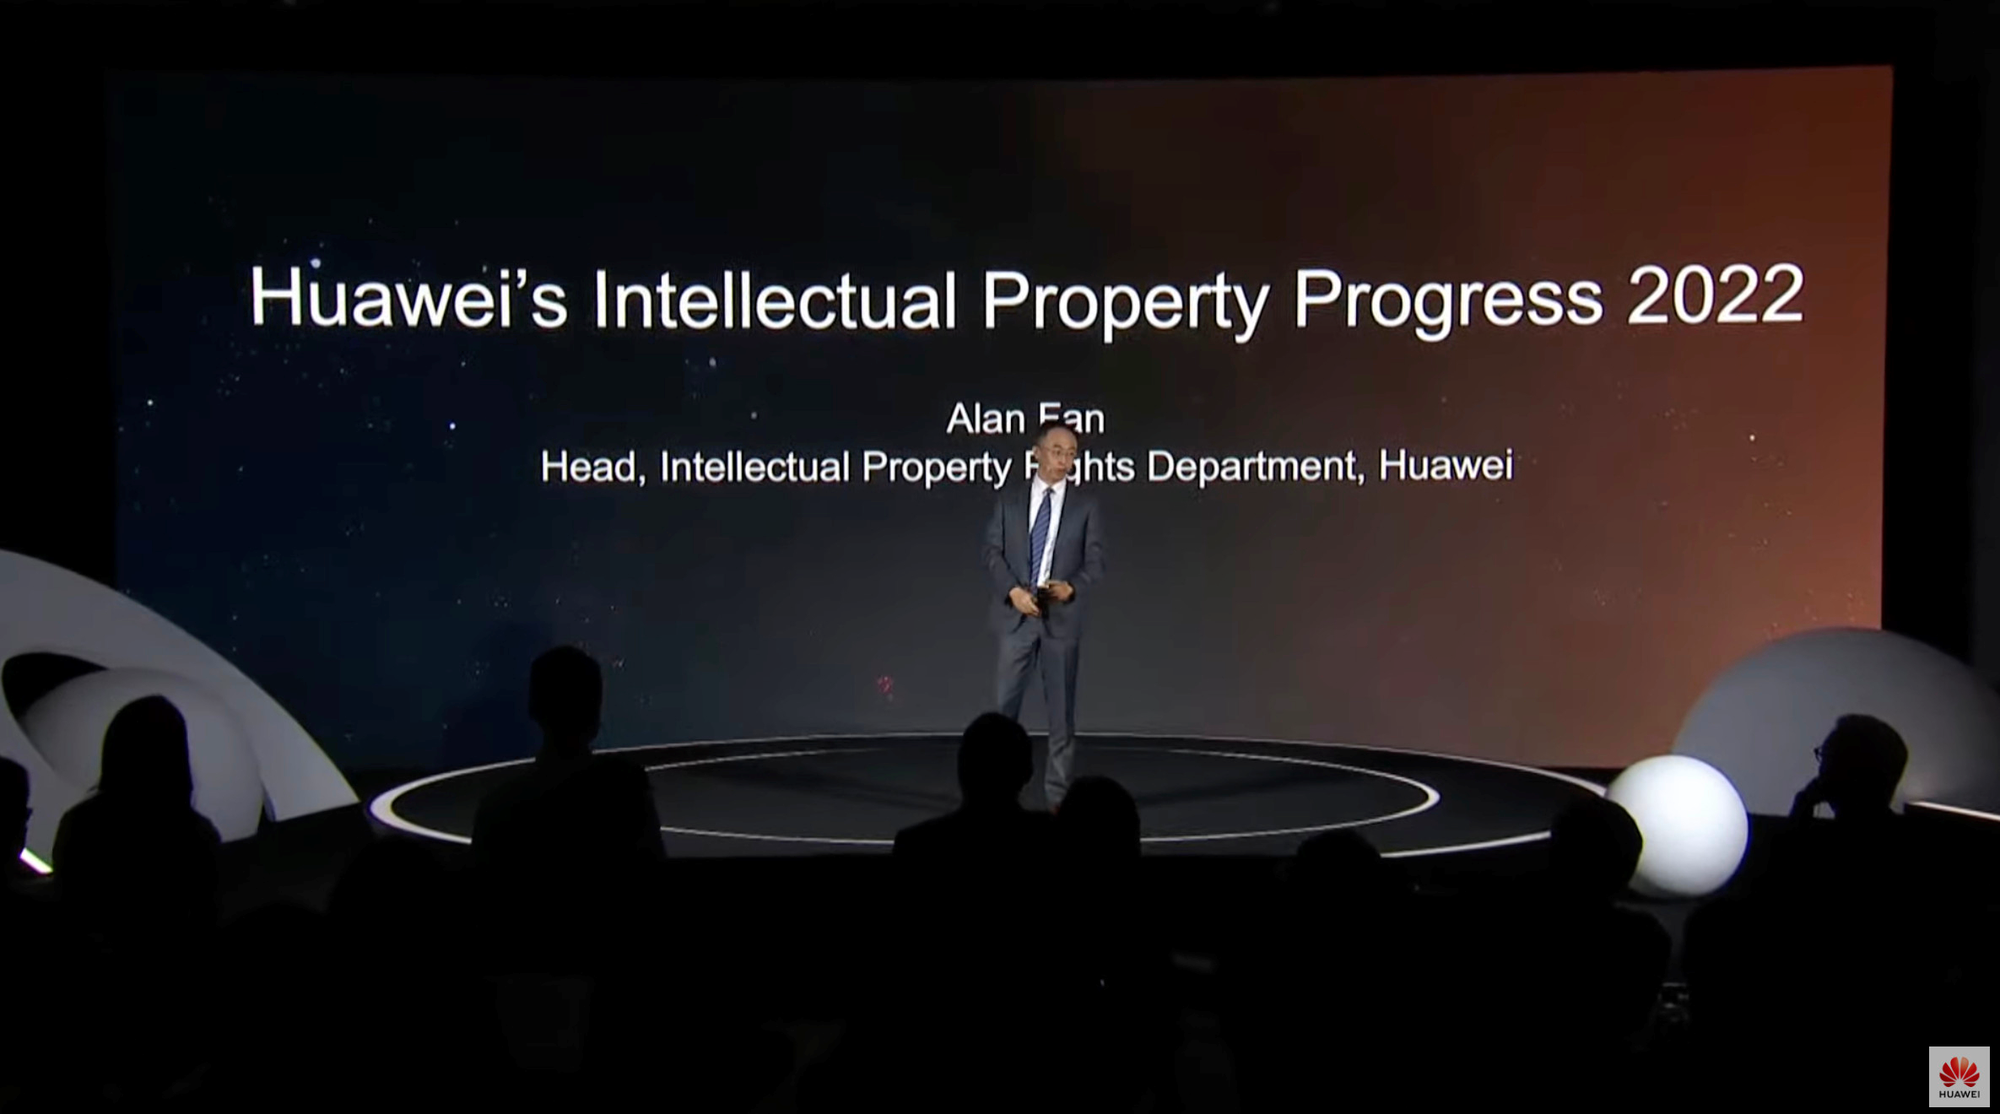 Huawei announced a series of new inventions that revolutionized AI, 5G and User Experience - Photo 1.